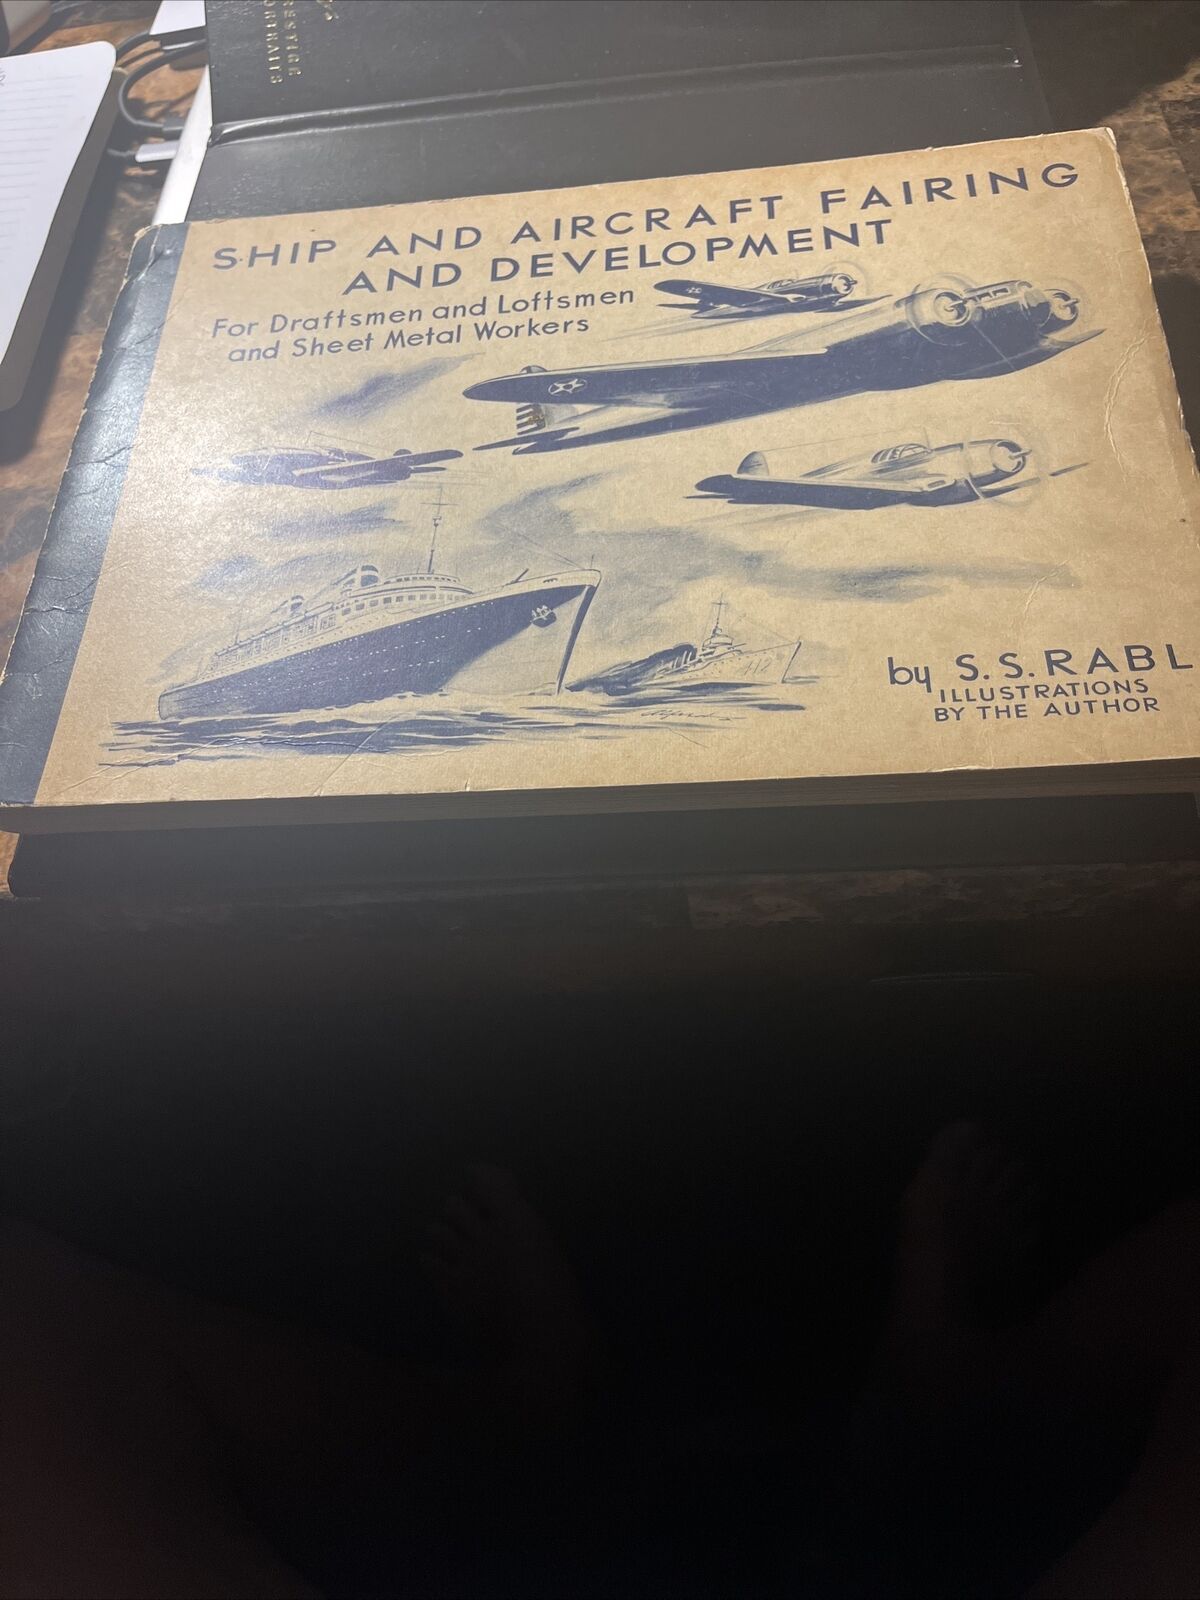 Ship And Aircraft Fairing And Development By S.S.Rabl 1941 Issue Nice Copy